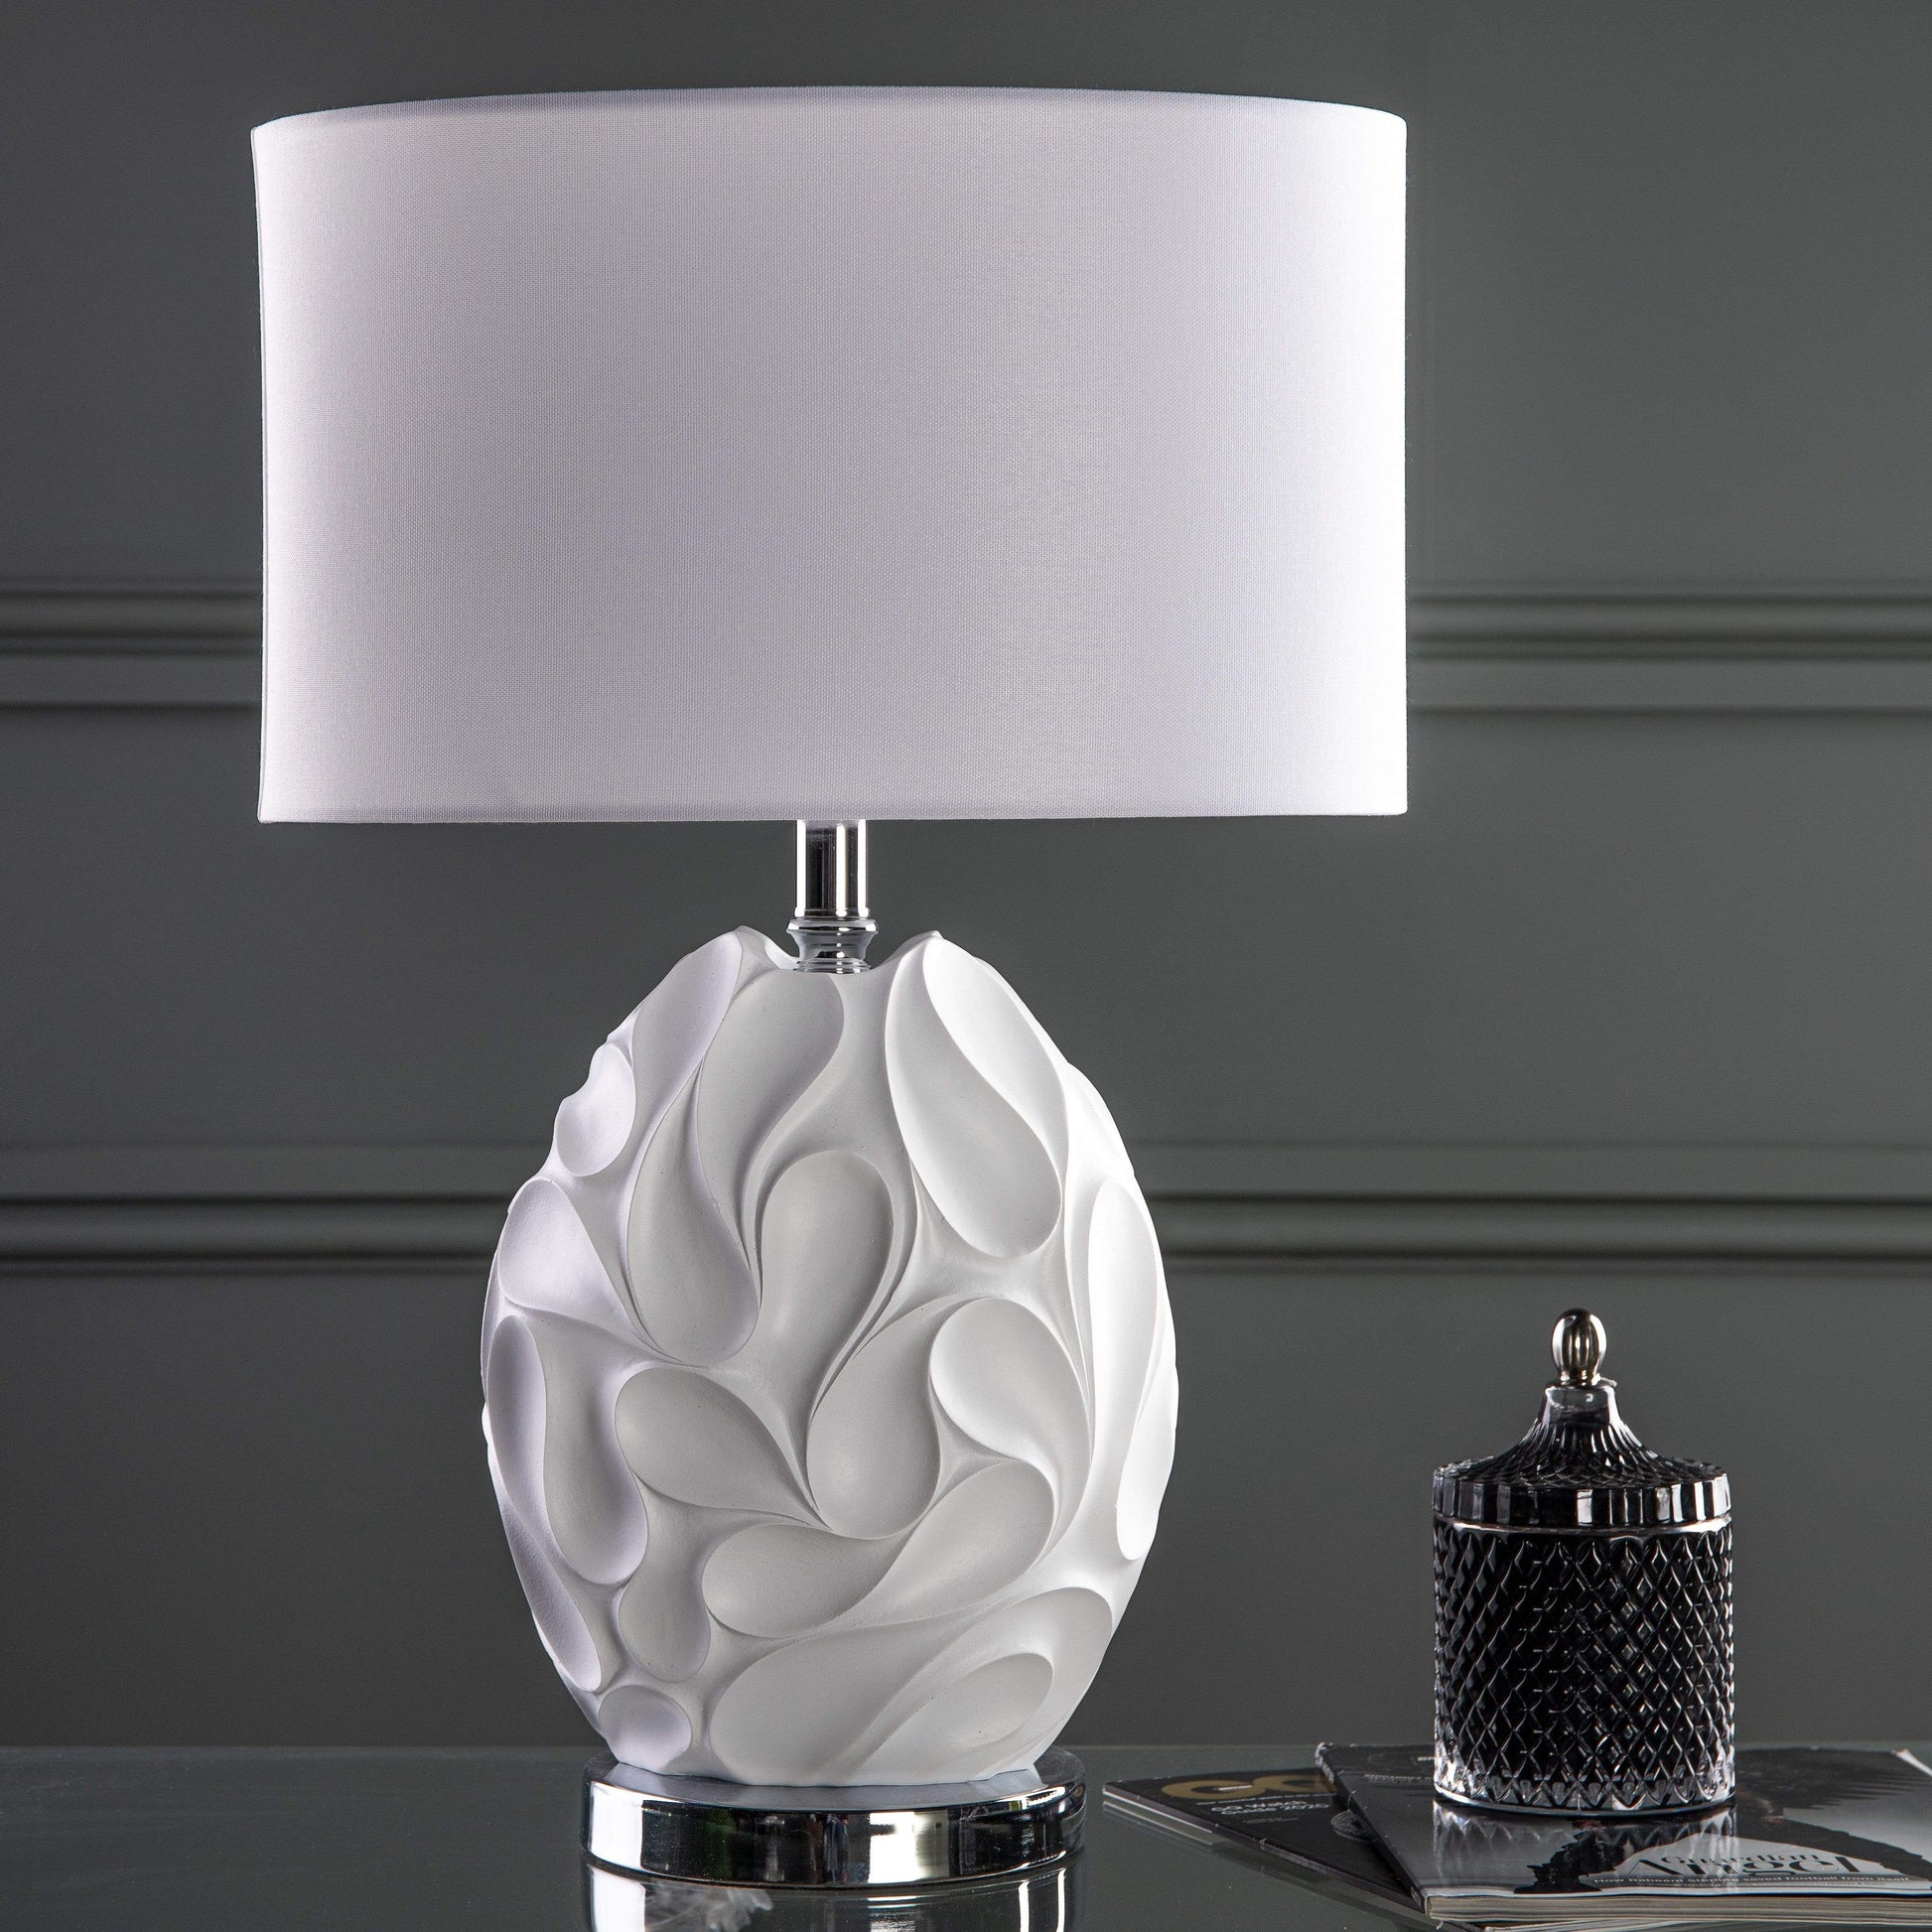 Lights  -  Zachary Table Lamp White Oval Complete With Shade  -  50142073